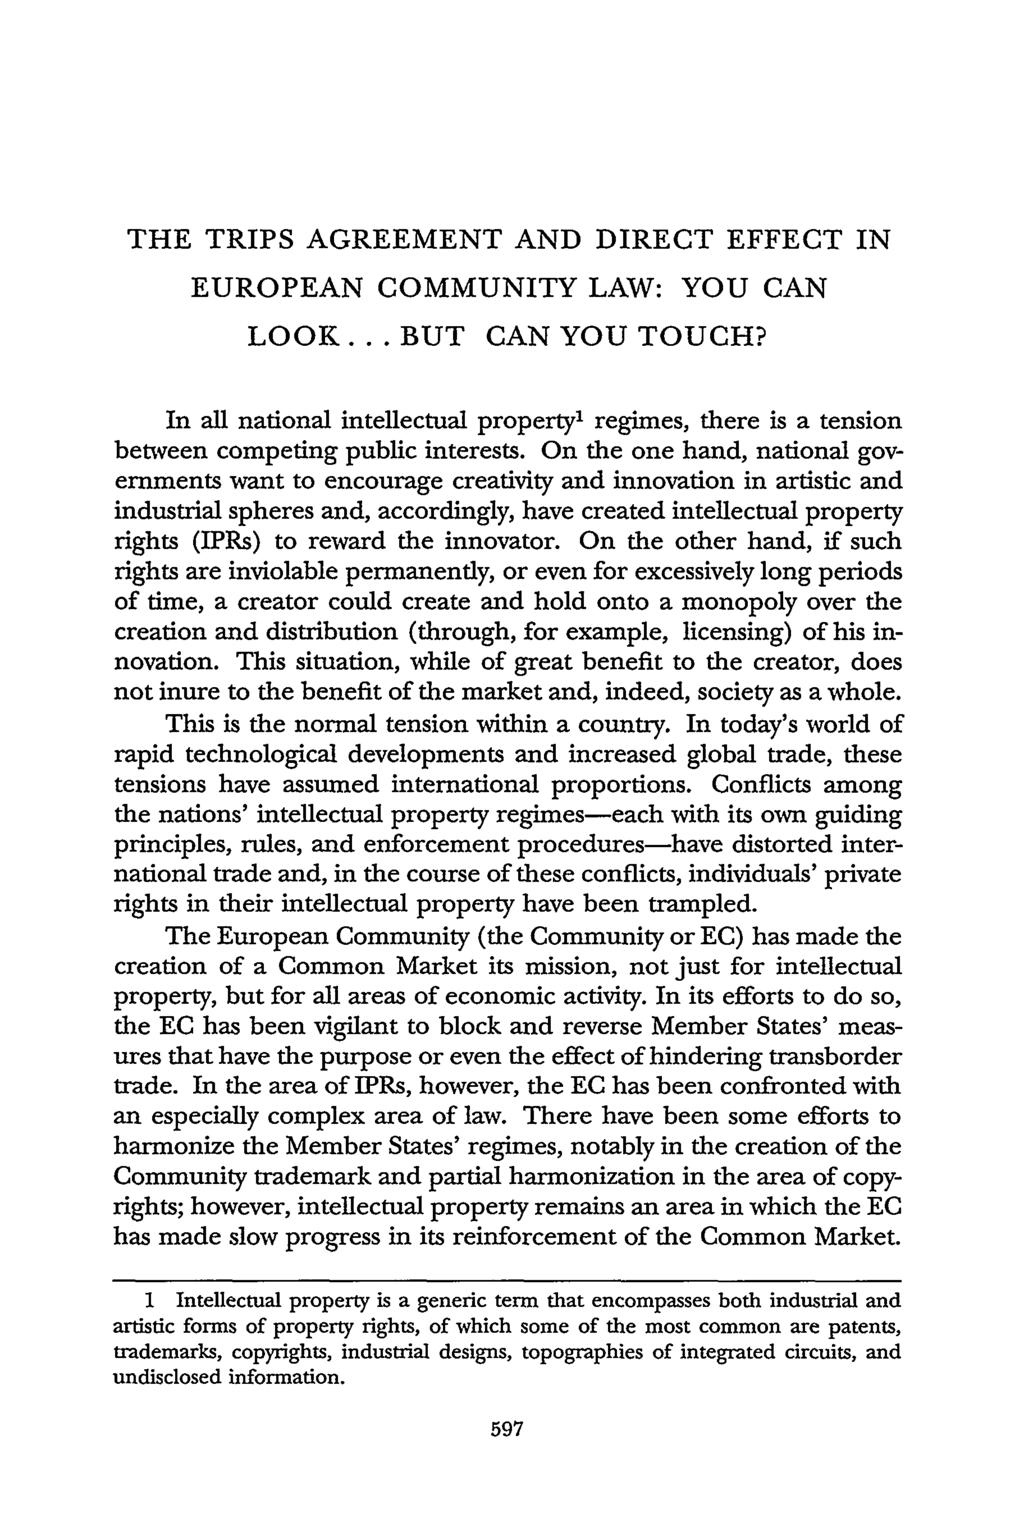 THE TRIPS AGREEMENT AND DIRECT EFFECT IN EUROPEAN COMMUNITY LAW: YOU CAN LOOK... BUT CAN YOU TOUCH?